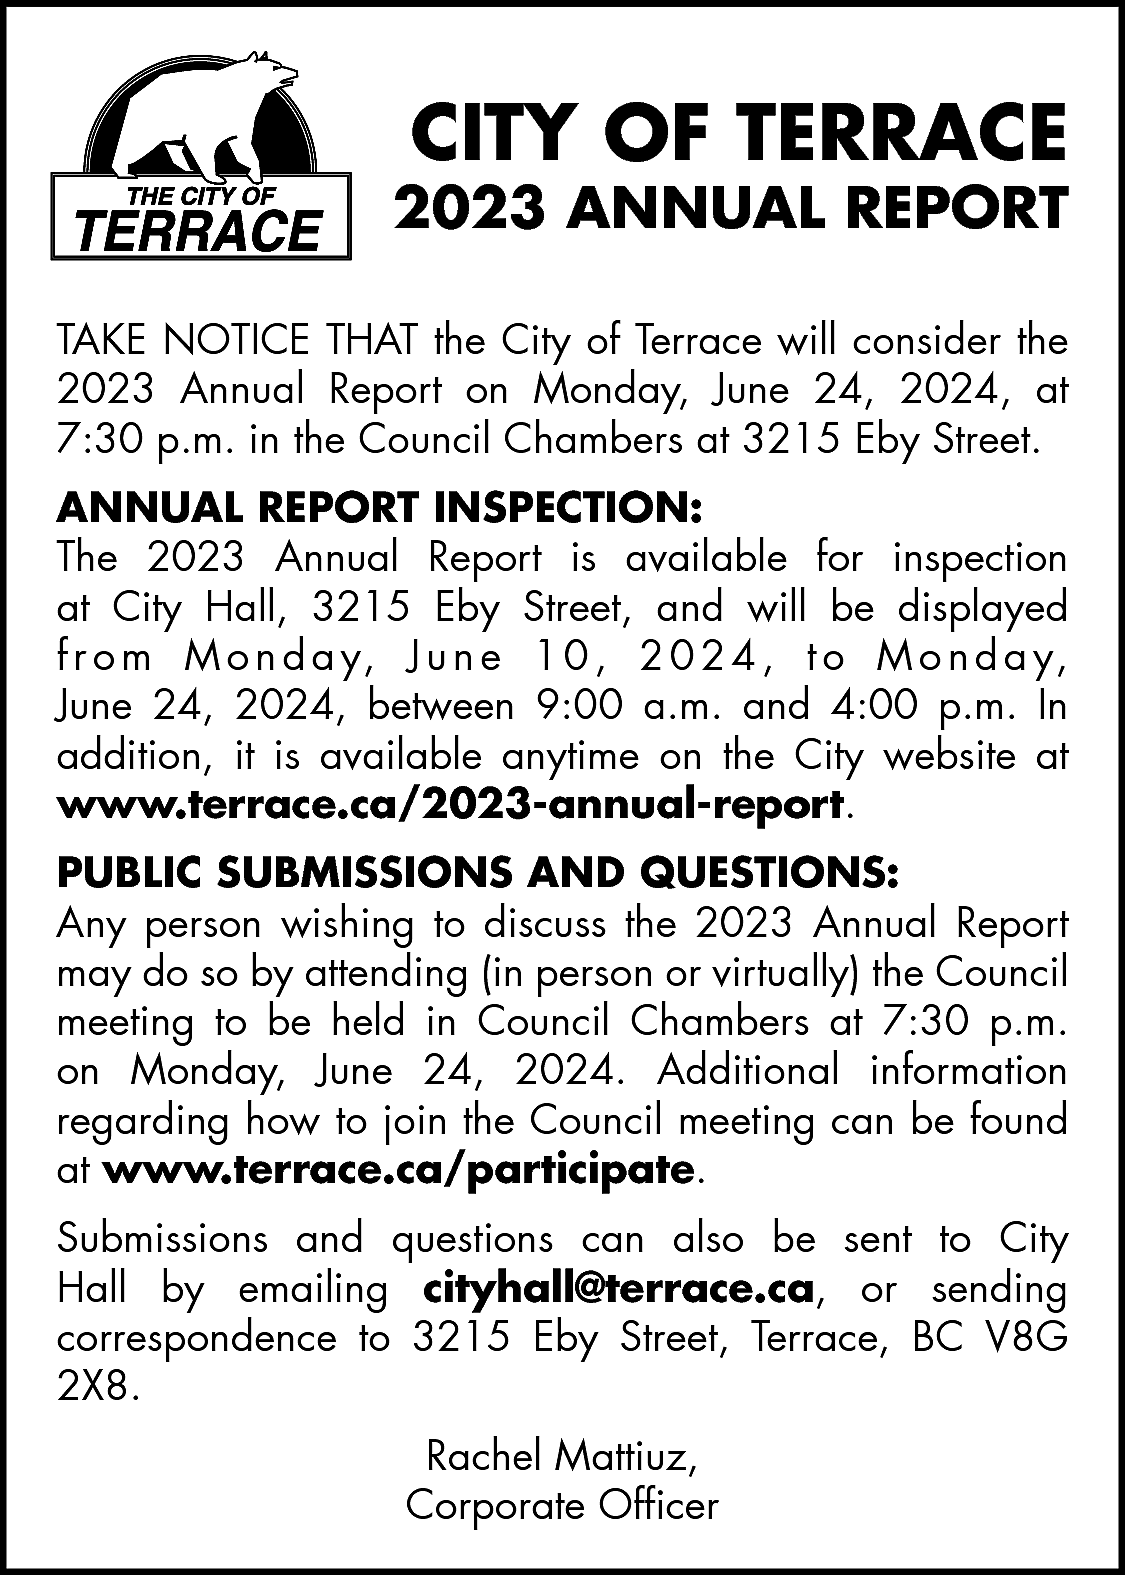 CITY OF TERRACE <br> <br>2023  CITY OF TERRACE    2023 ANNUAL REPORT  TAKE NOTICE THAT the City of Terrace will consider the  2023 Annual Report on Monday, June 24, 2024, at  7:30 p.m. in the Council Chambers at 3215 Eby Street.    ANNUAL REPORT INSPECTION:  The 2023 Annual Report is available for inspection  at City Hall, 3215 Eby Street, and will be displayed  f r o m M o n d a y, J u n e 1 0 , 2 0 2 4 , t o M o n d a y,  June 24, 2024, between 9:00 a.m. and 4:00 p.m. In  addition, it is available anytime on the City website at  www.terrace.ca/2023-annual-report.  PUBLIC SUBMISSIONS AND QUESTIONS:  Any person wishing to discuss the 2023 Annual Report  may do so by attending (in person or virtually) the Council  meeting to be held in Council Chambers at 7:30 p.m.  on Monday, June 24, 2024. Additional information  regarding how to join the Council meeting can be found  at www.terrace.ca/participate.  Submissions and questions can also be sent to City  Hall by emailing cityhall@terrace.ca, or sending  correspondence to 3215 Eby Street, Terrace, BC V8G  2X8.  Rachel Mattiuz,  Corporate Officer    